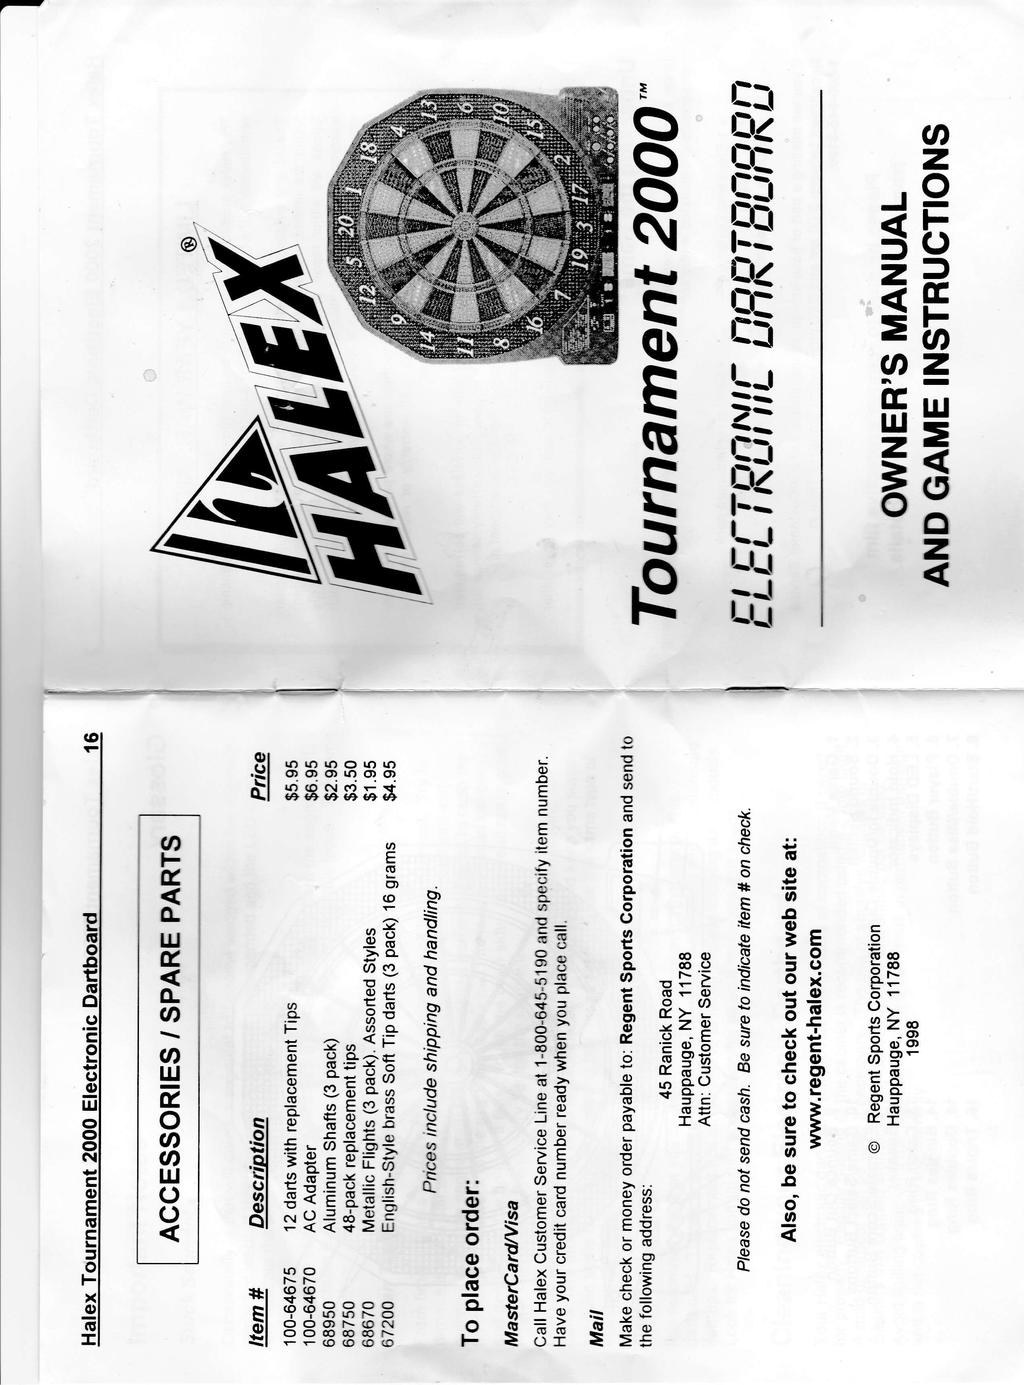 Halex Tournament 2000 Electronic Dartboard 16 ACCESSORIES / SPARE PARTS Item # Description Price 100-64675 12 darts with replacement Tips $5.95 100-64670 AC Adapter $6.